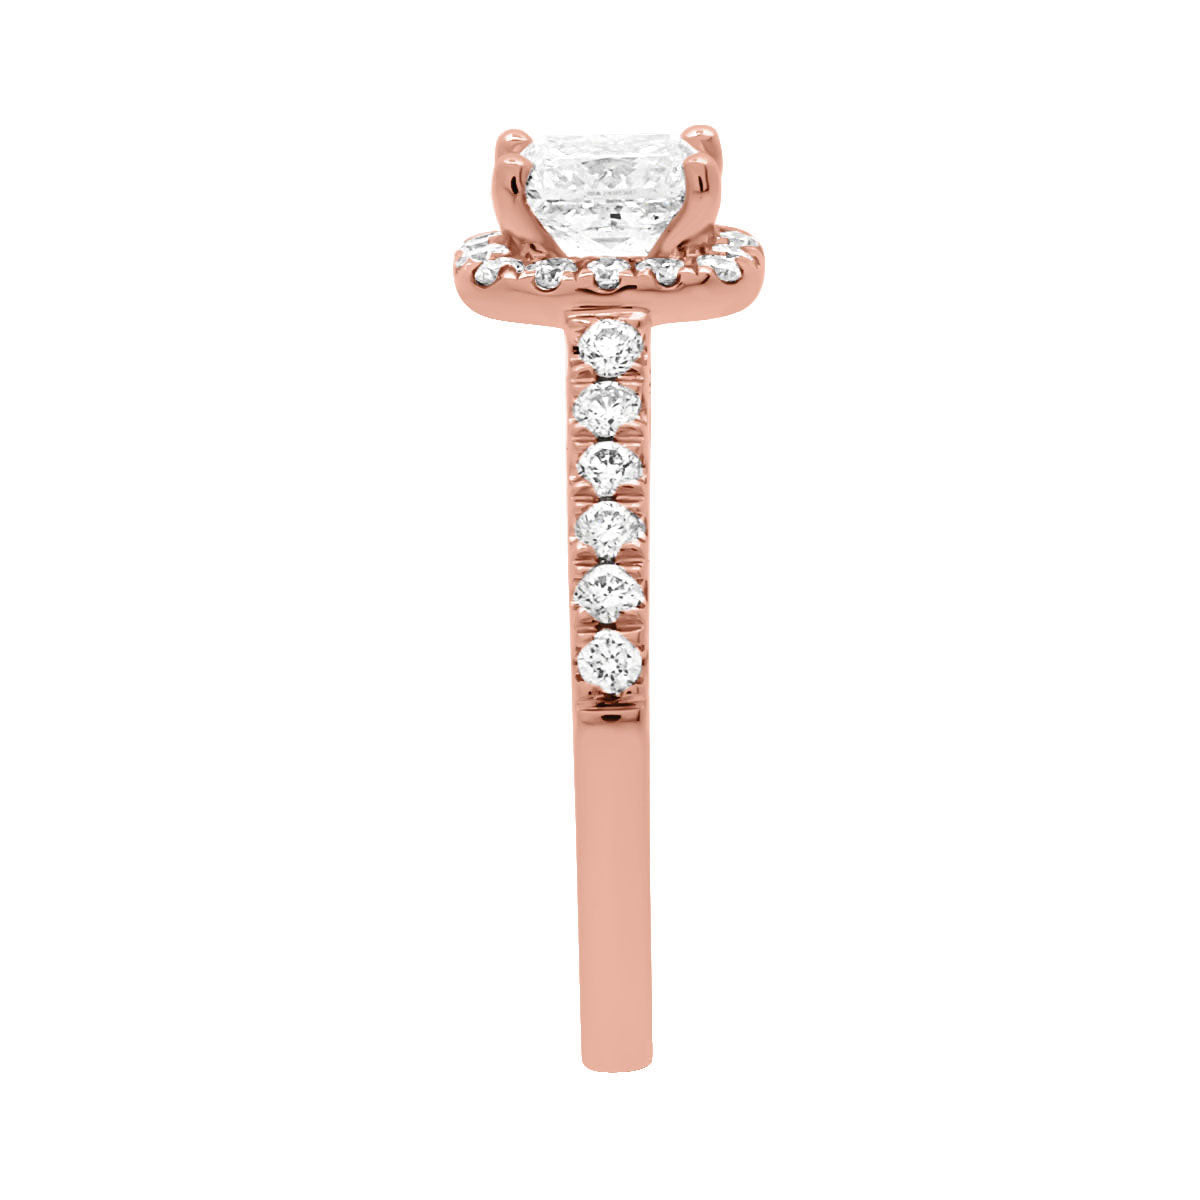 Princess Cut Diamond Halo Ring in rose gold from an end view